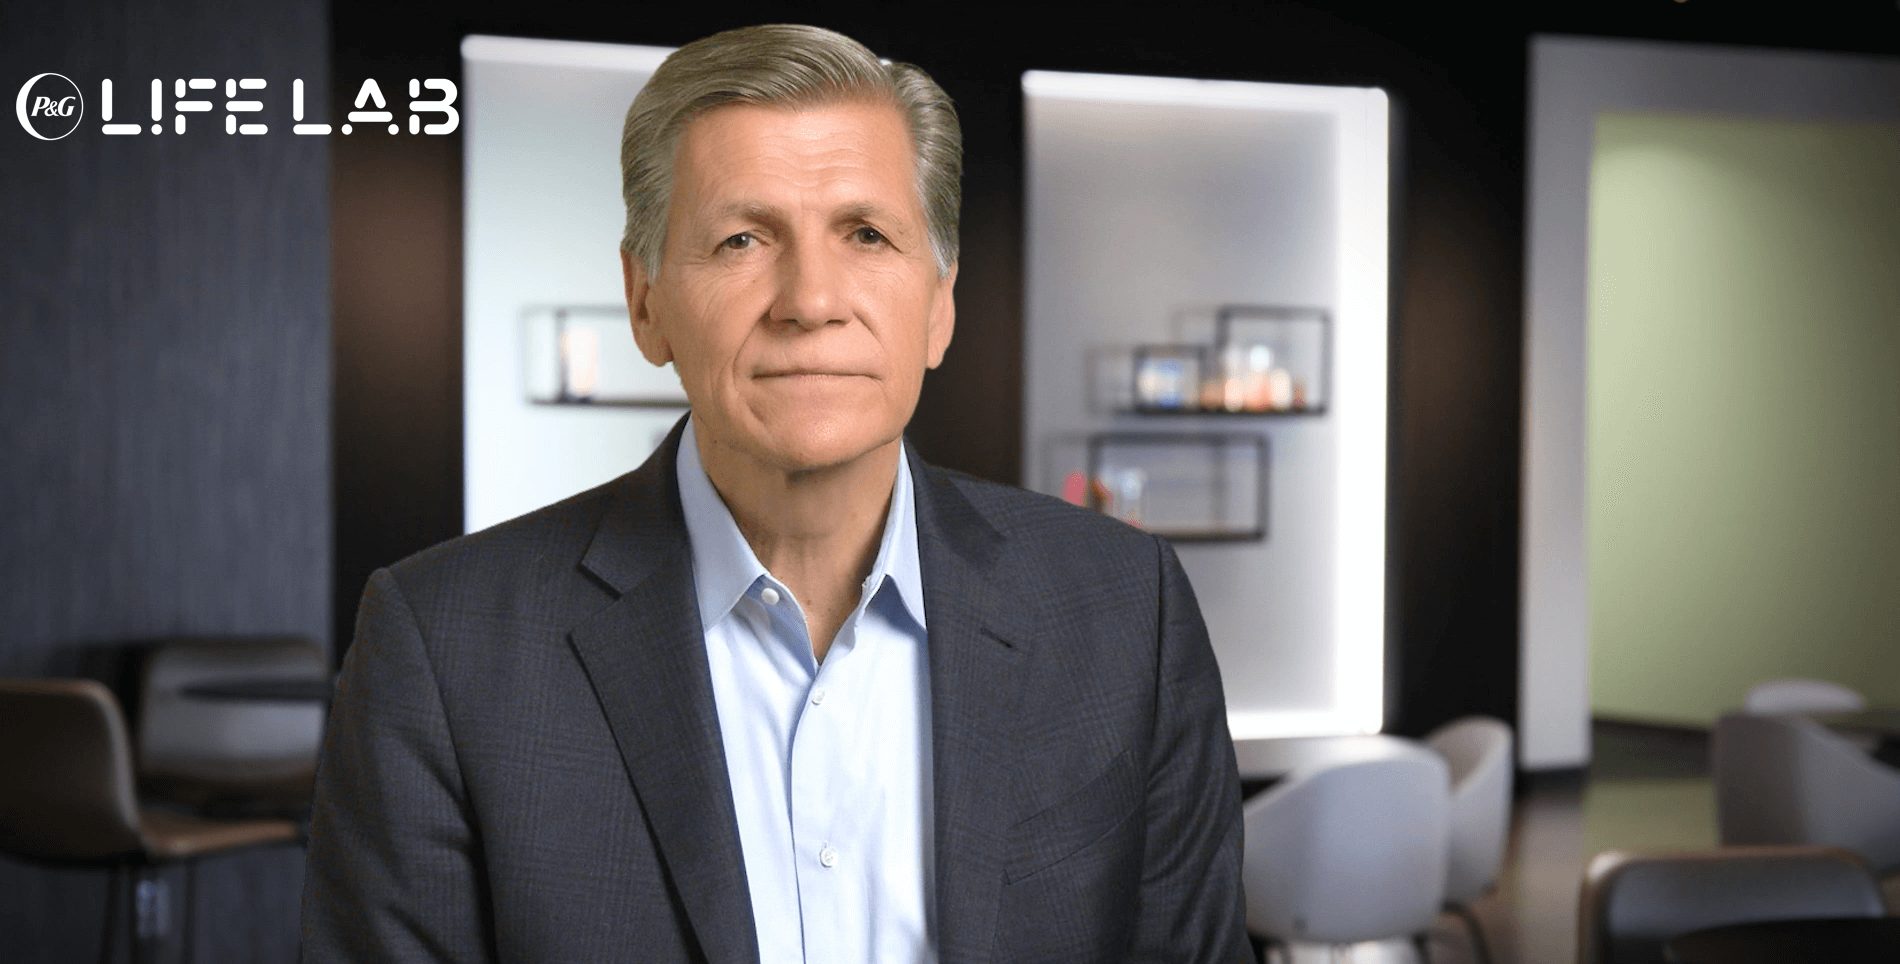 Marc Pritchard, P&G Chief Brand Officer, discusses how P&G is developing superior brands that reinvent the consumer experience